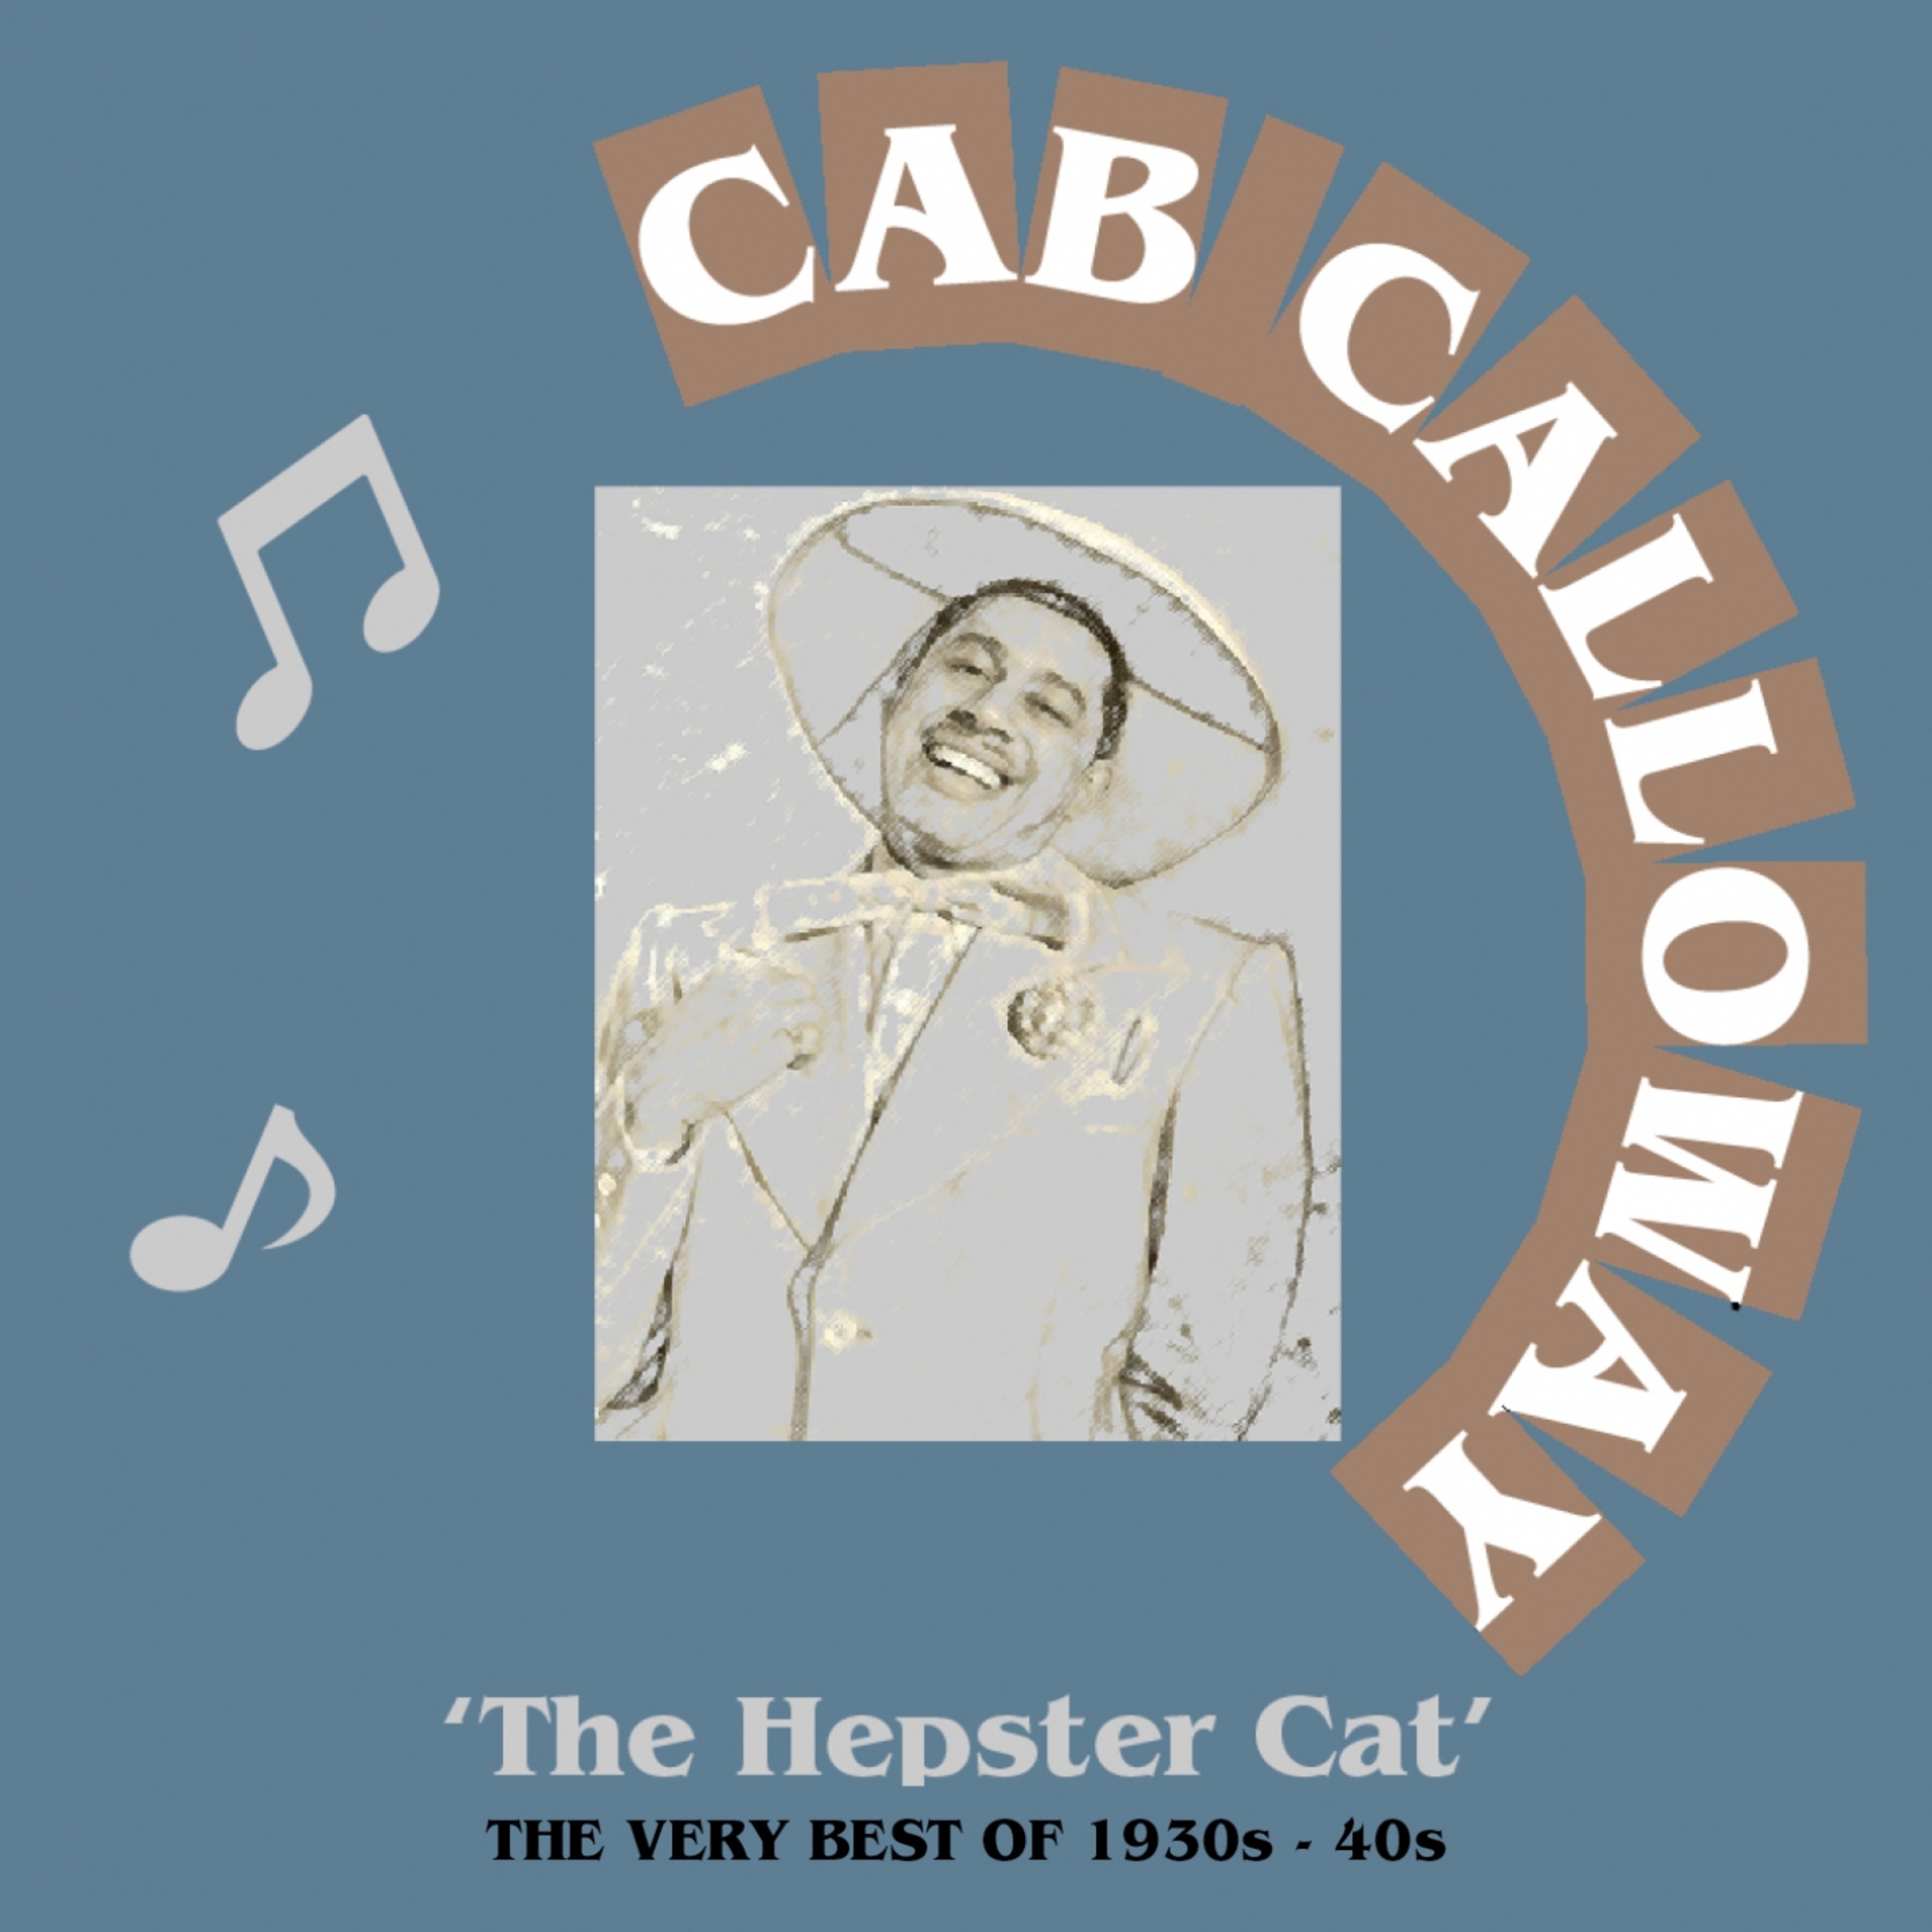 The Hepster Cat: The Very Best of 1920s - 40s